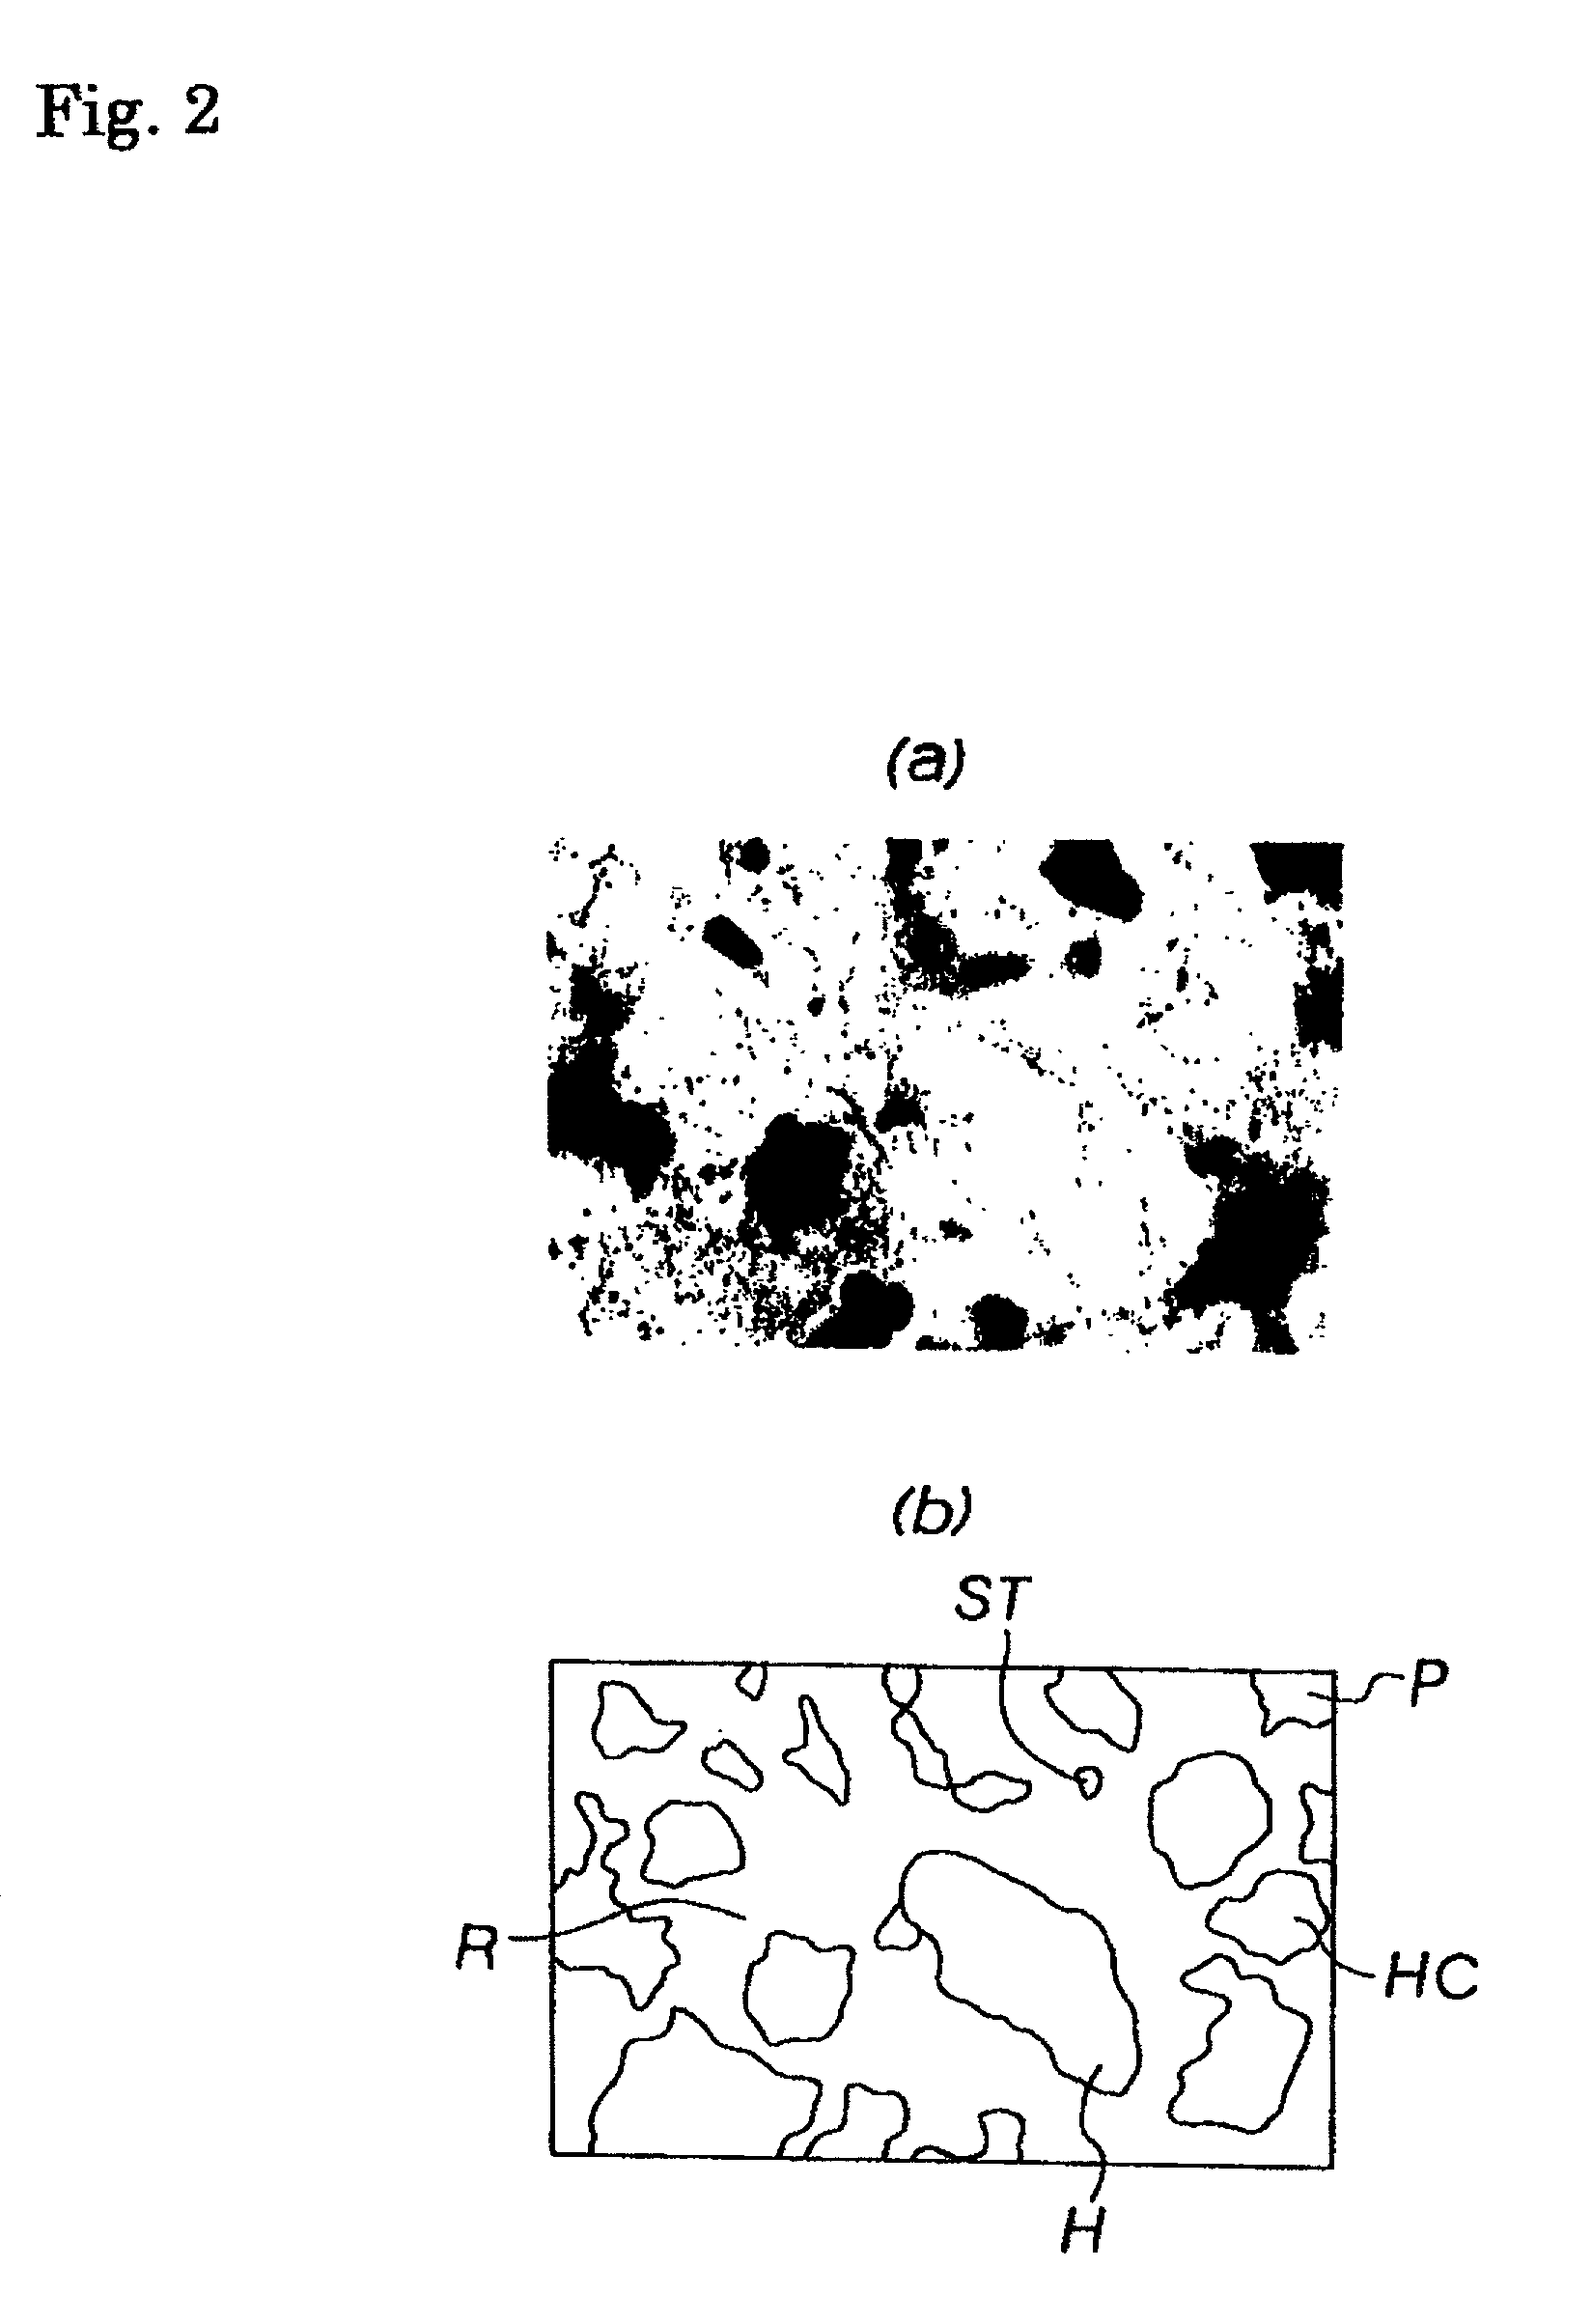 Iron-based sintered alloy material for valve seat and valve seat made of iron-based sintered alloy